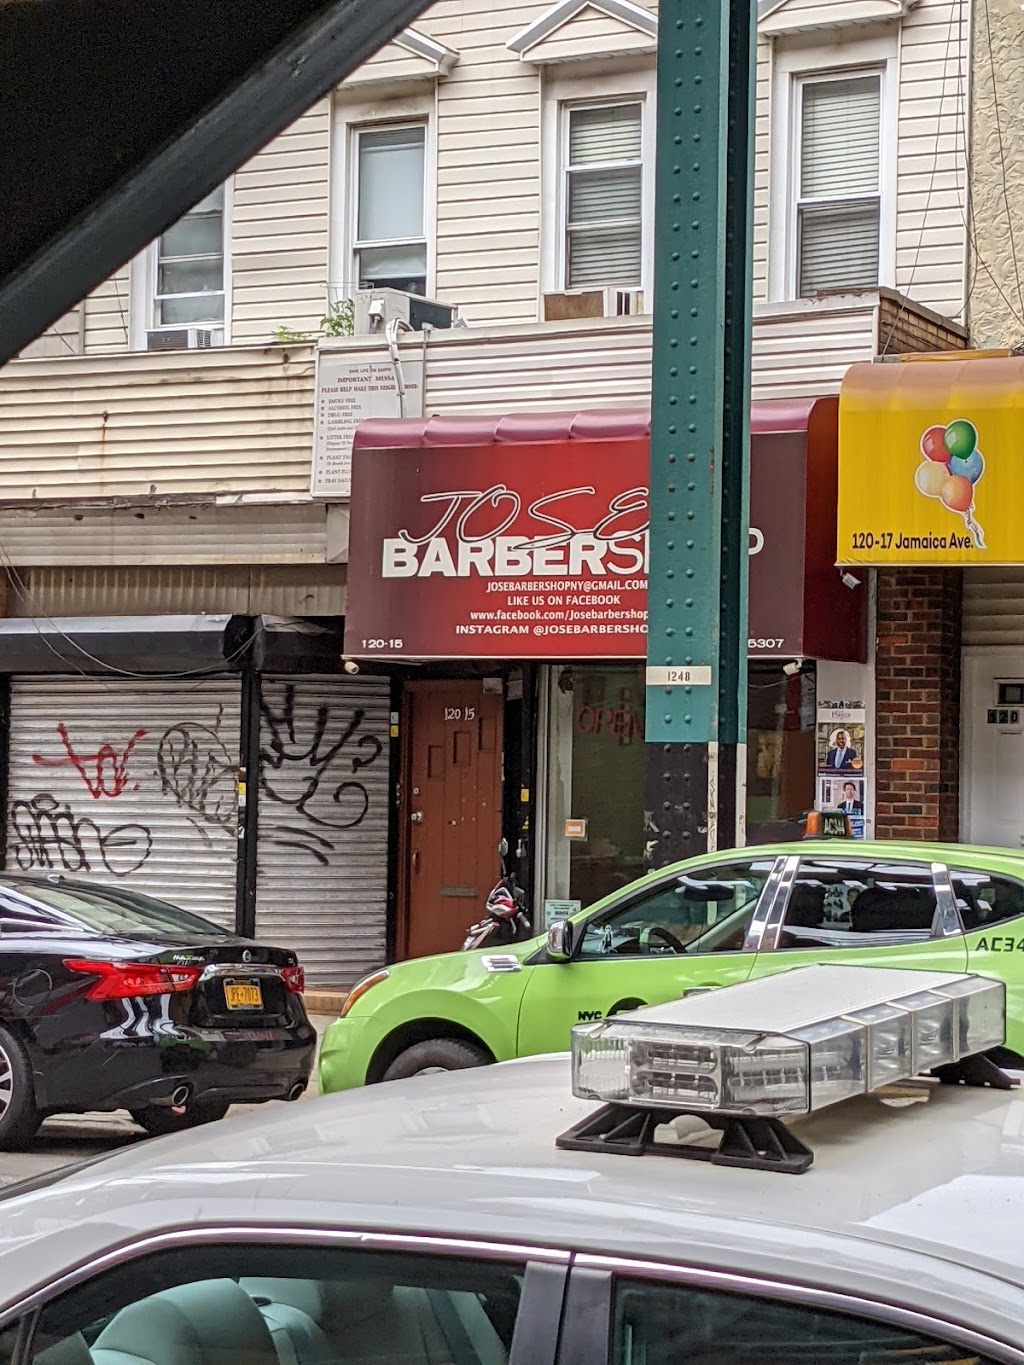 Jose Barber Shop | 12015 Jamaica Ave, Queens, NY 11418 | Phone: (347) 418-5307